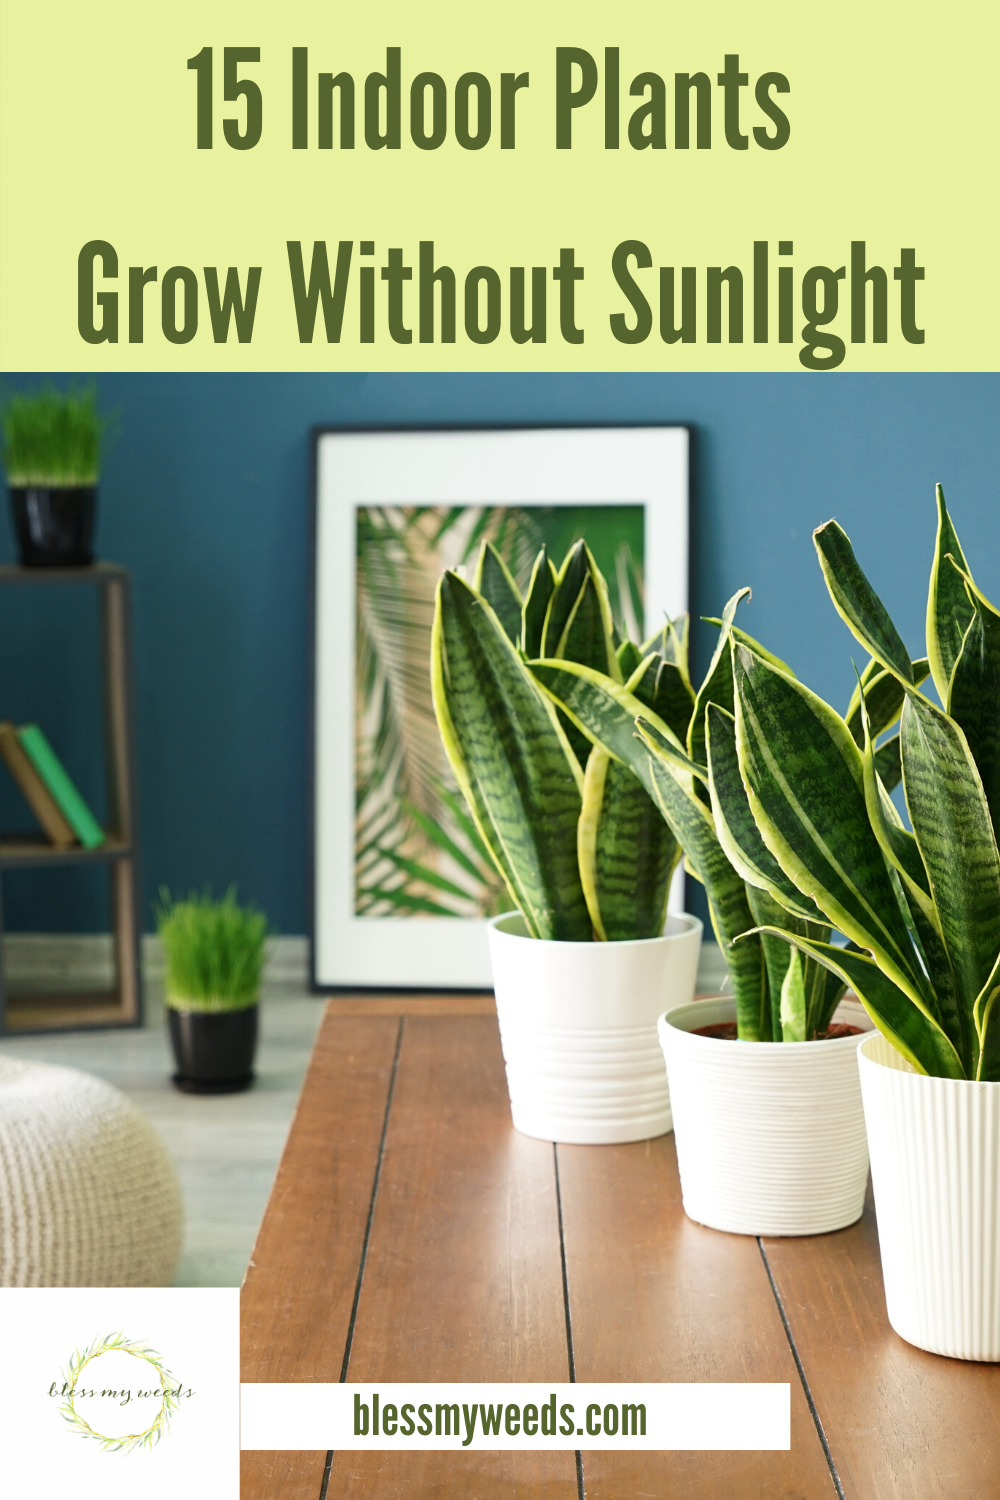 15 Beautiful Indoor Plants That Grow Without Sunlight -   19 plants Balcony articles ideas